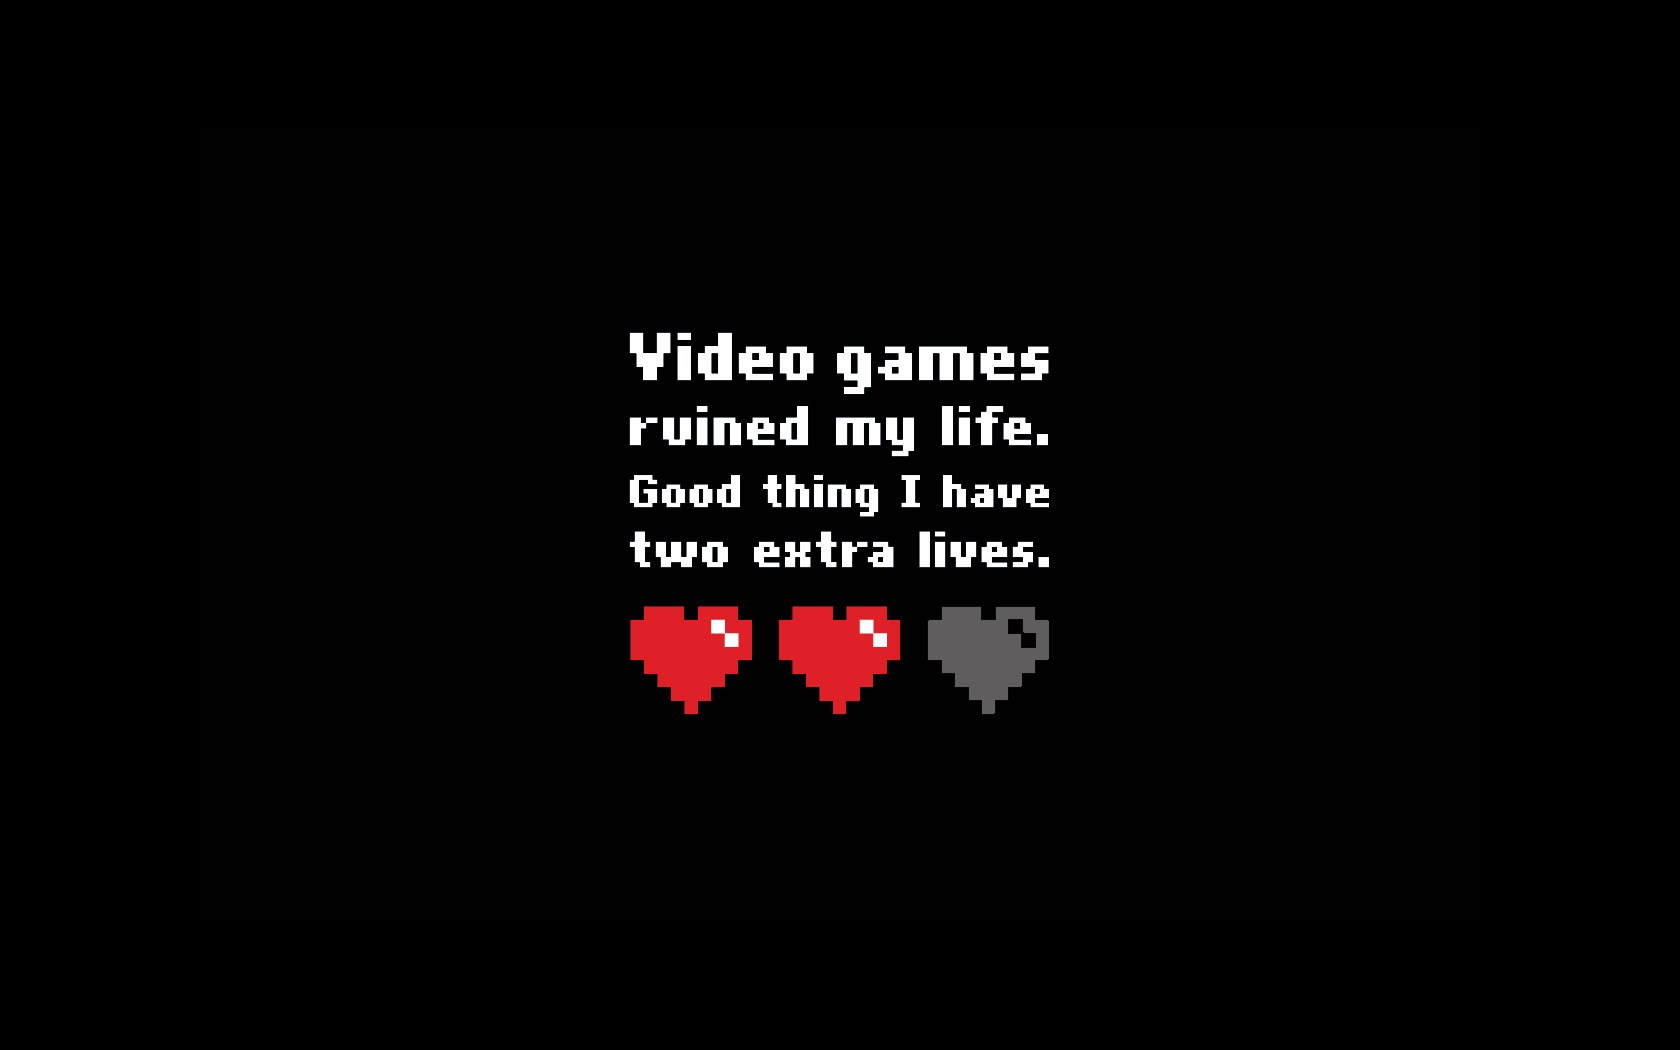 General 1680x1050 simple background black background pixelated video games video game art heart (design) humor typography